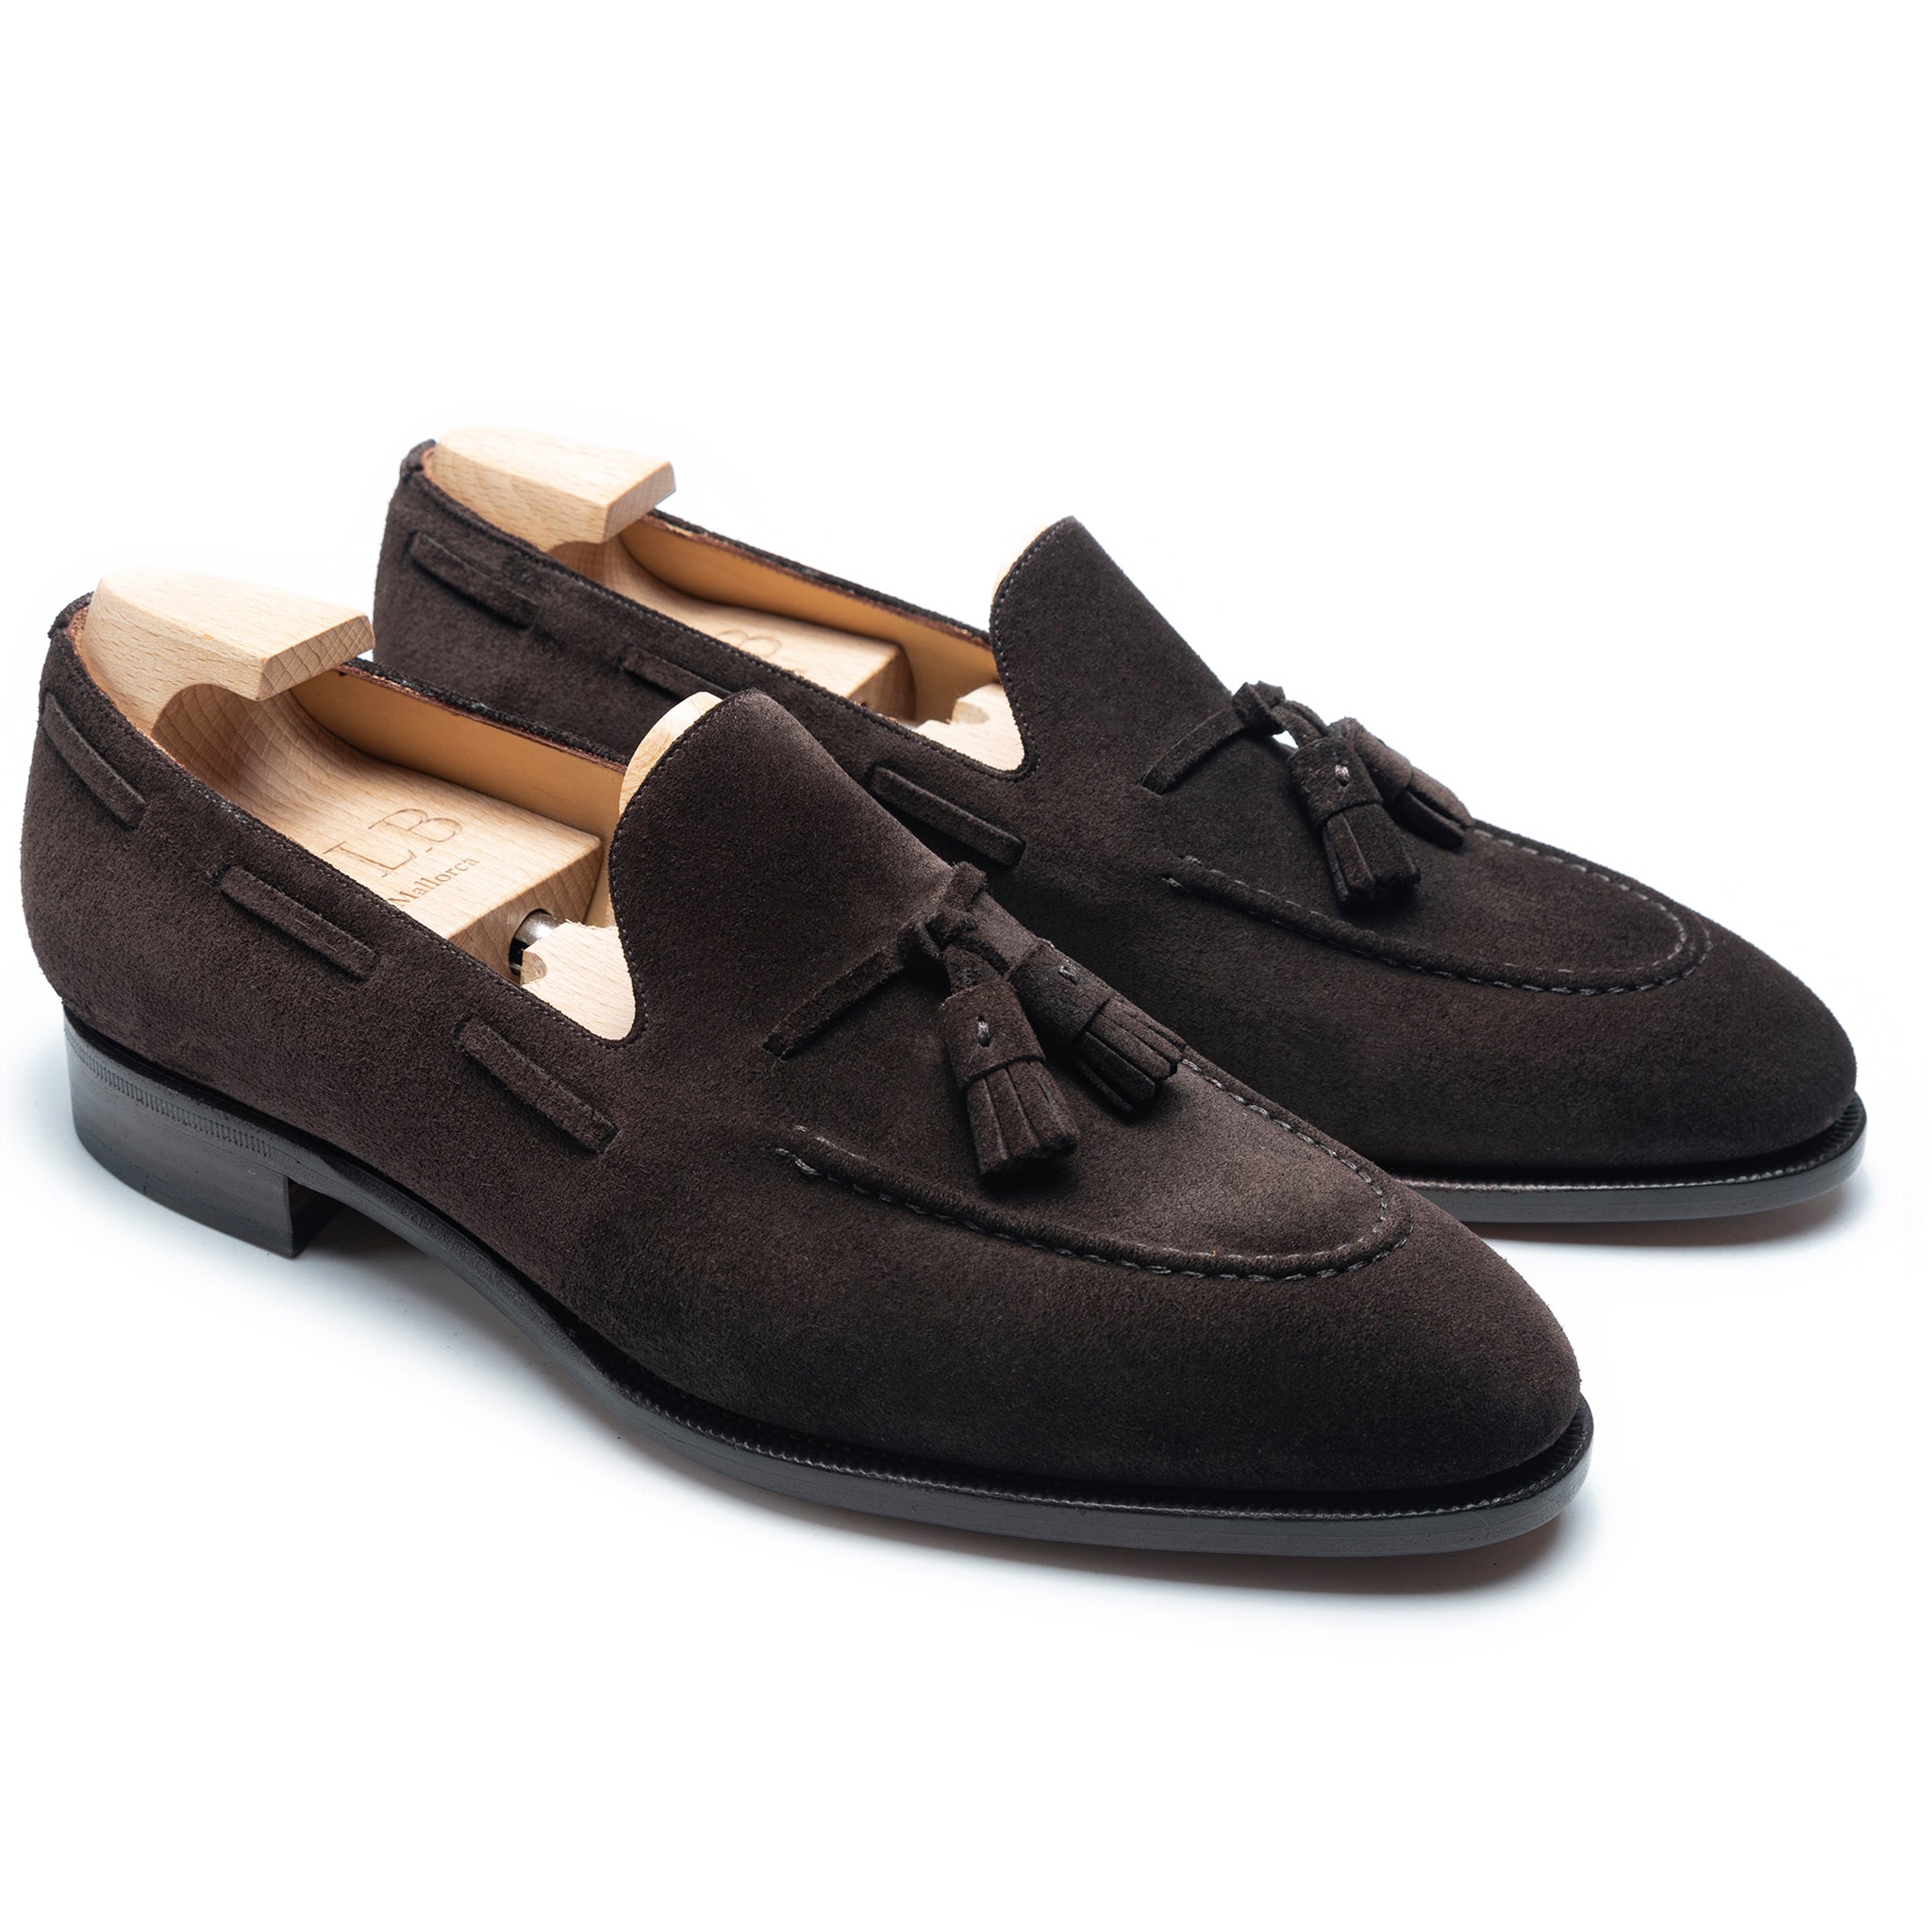 TLB Mallorca | Men's Leather loafers | Men's leather shoes | Goya brown ...